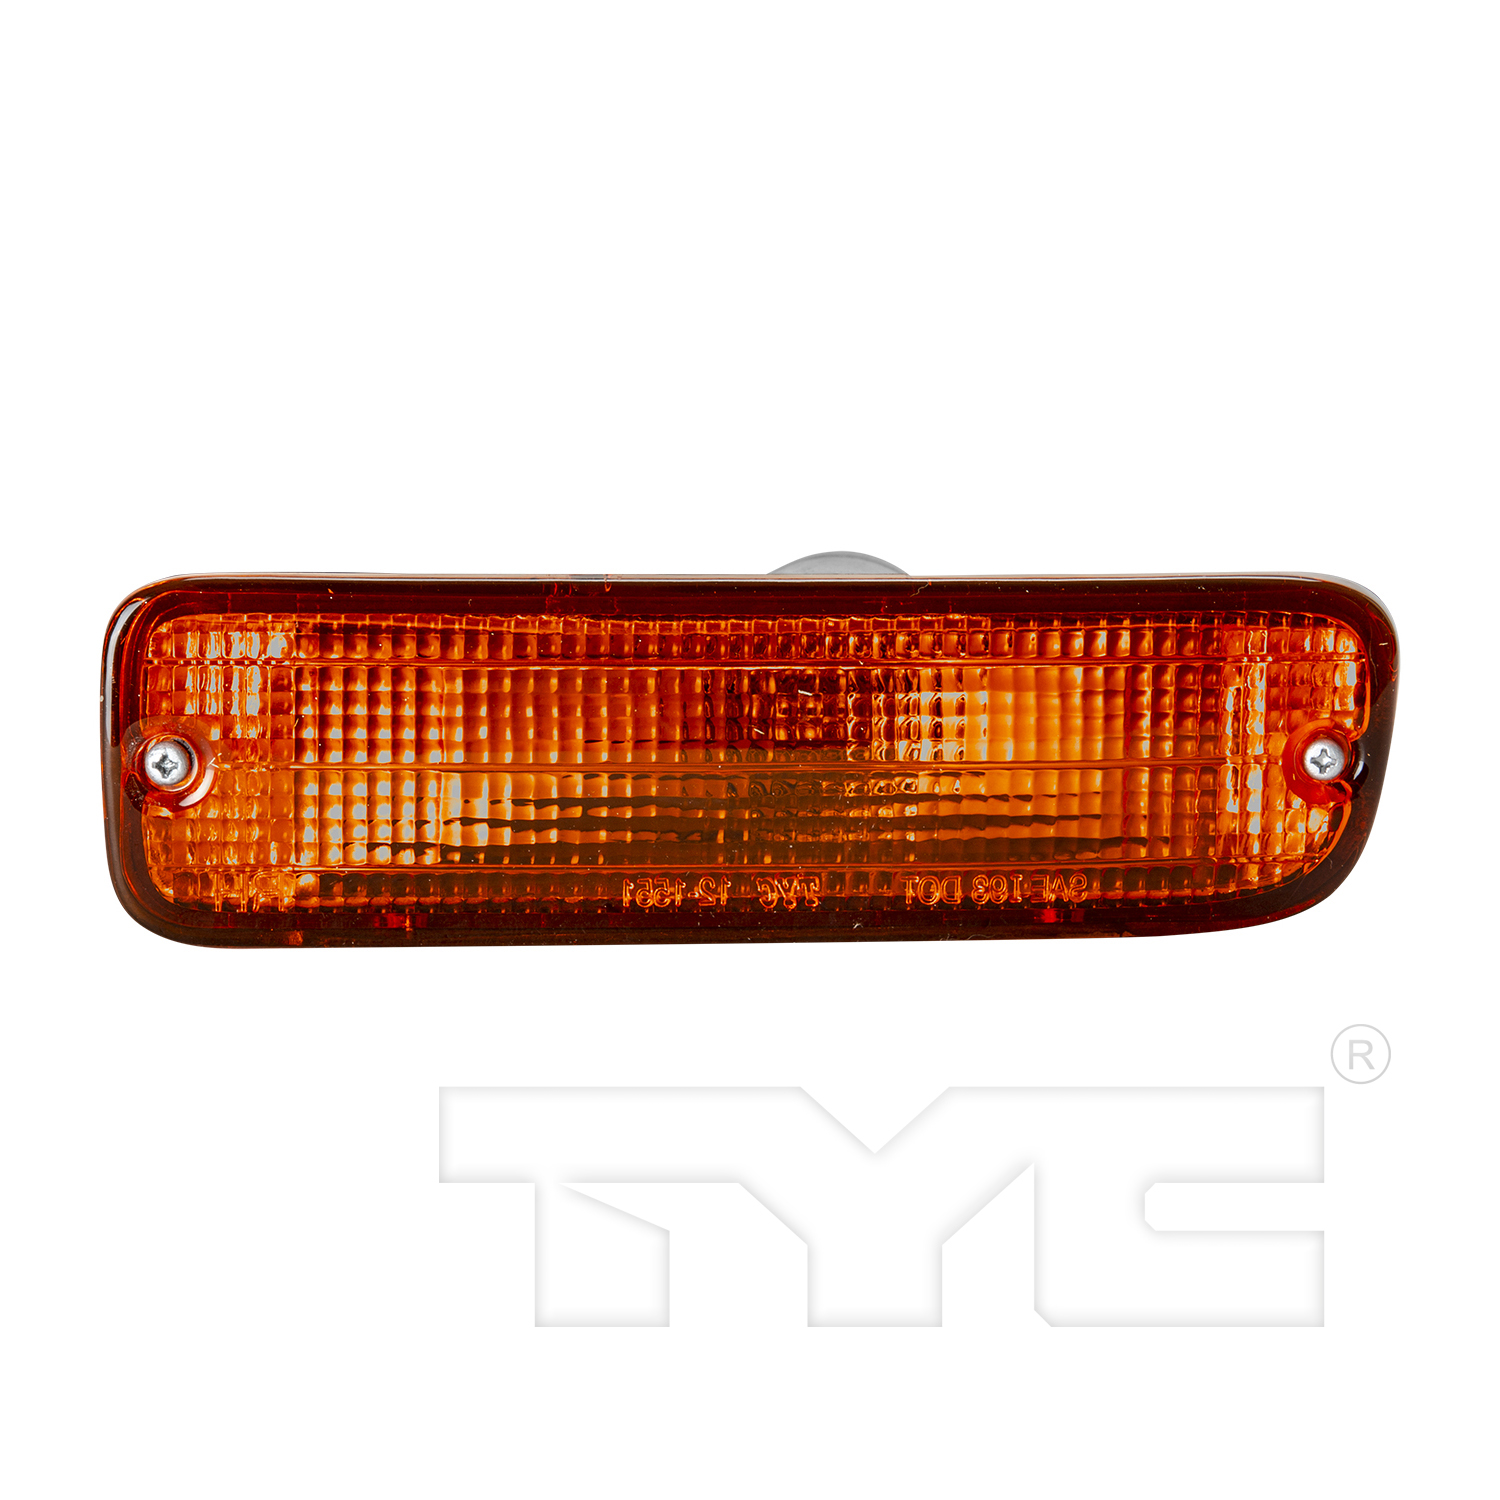 Aftermarket LAMPS for TOYOTA - TACOMA, TACOMA,95-97,LT Front signal lamp